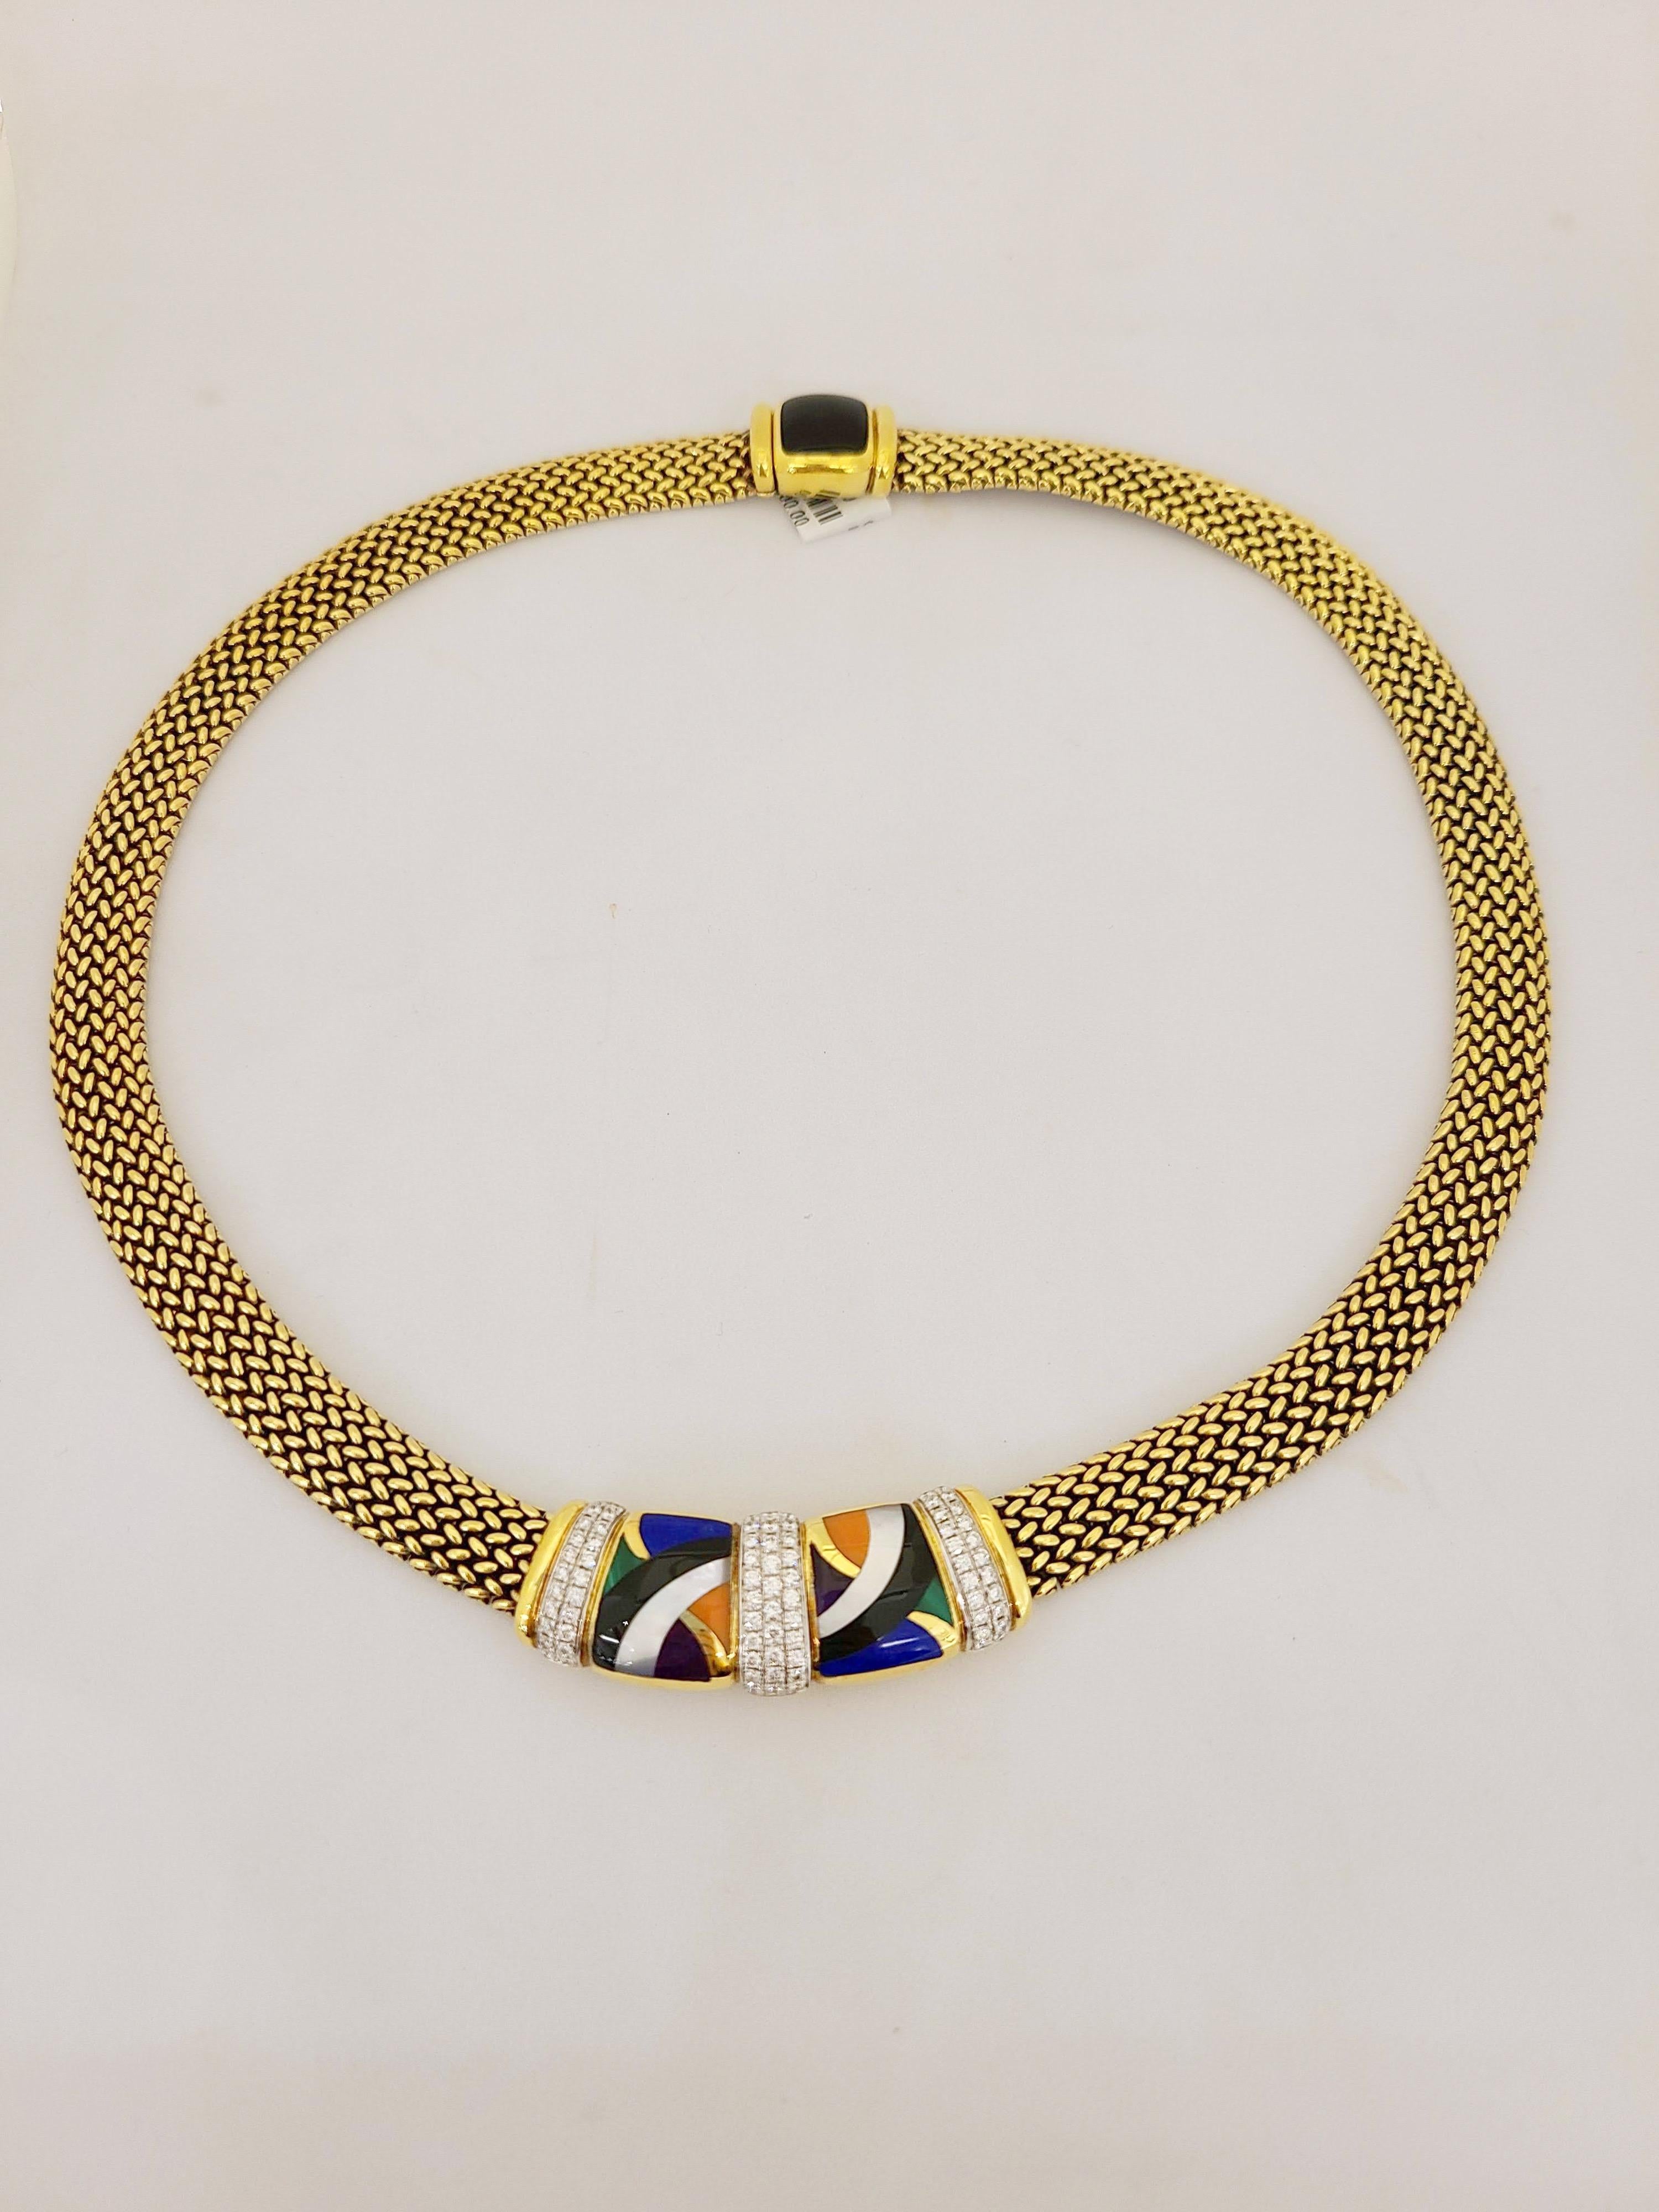 Contemporary Asch Grosbardt 18 Karat Yellow Gold Necklace with Diamonds and Inlaid Stones For Sale